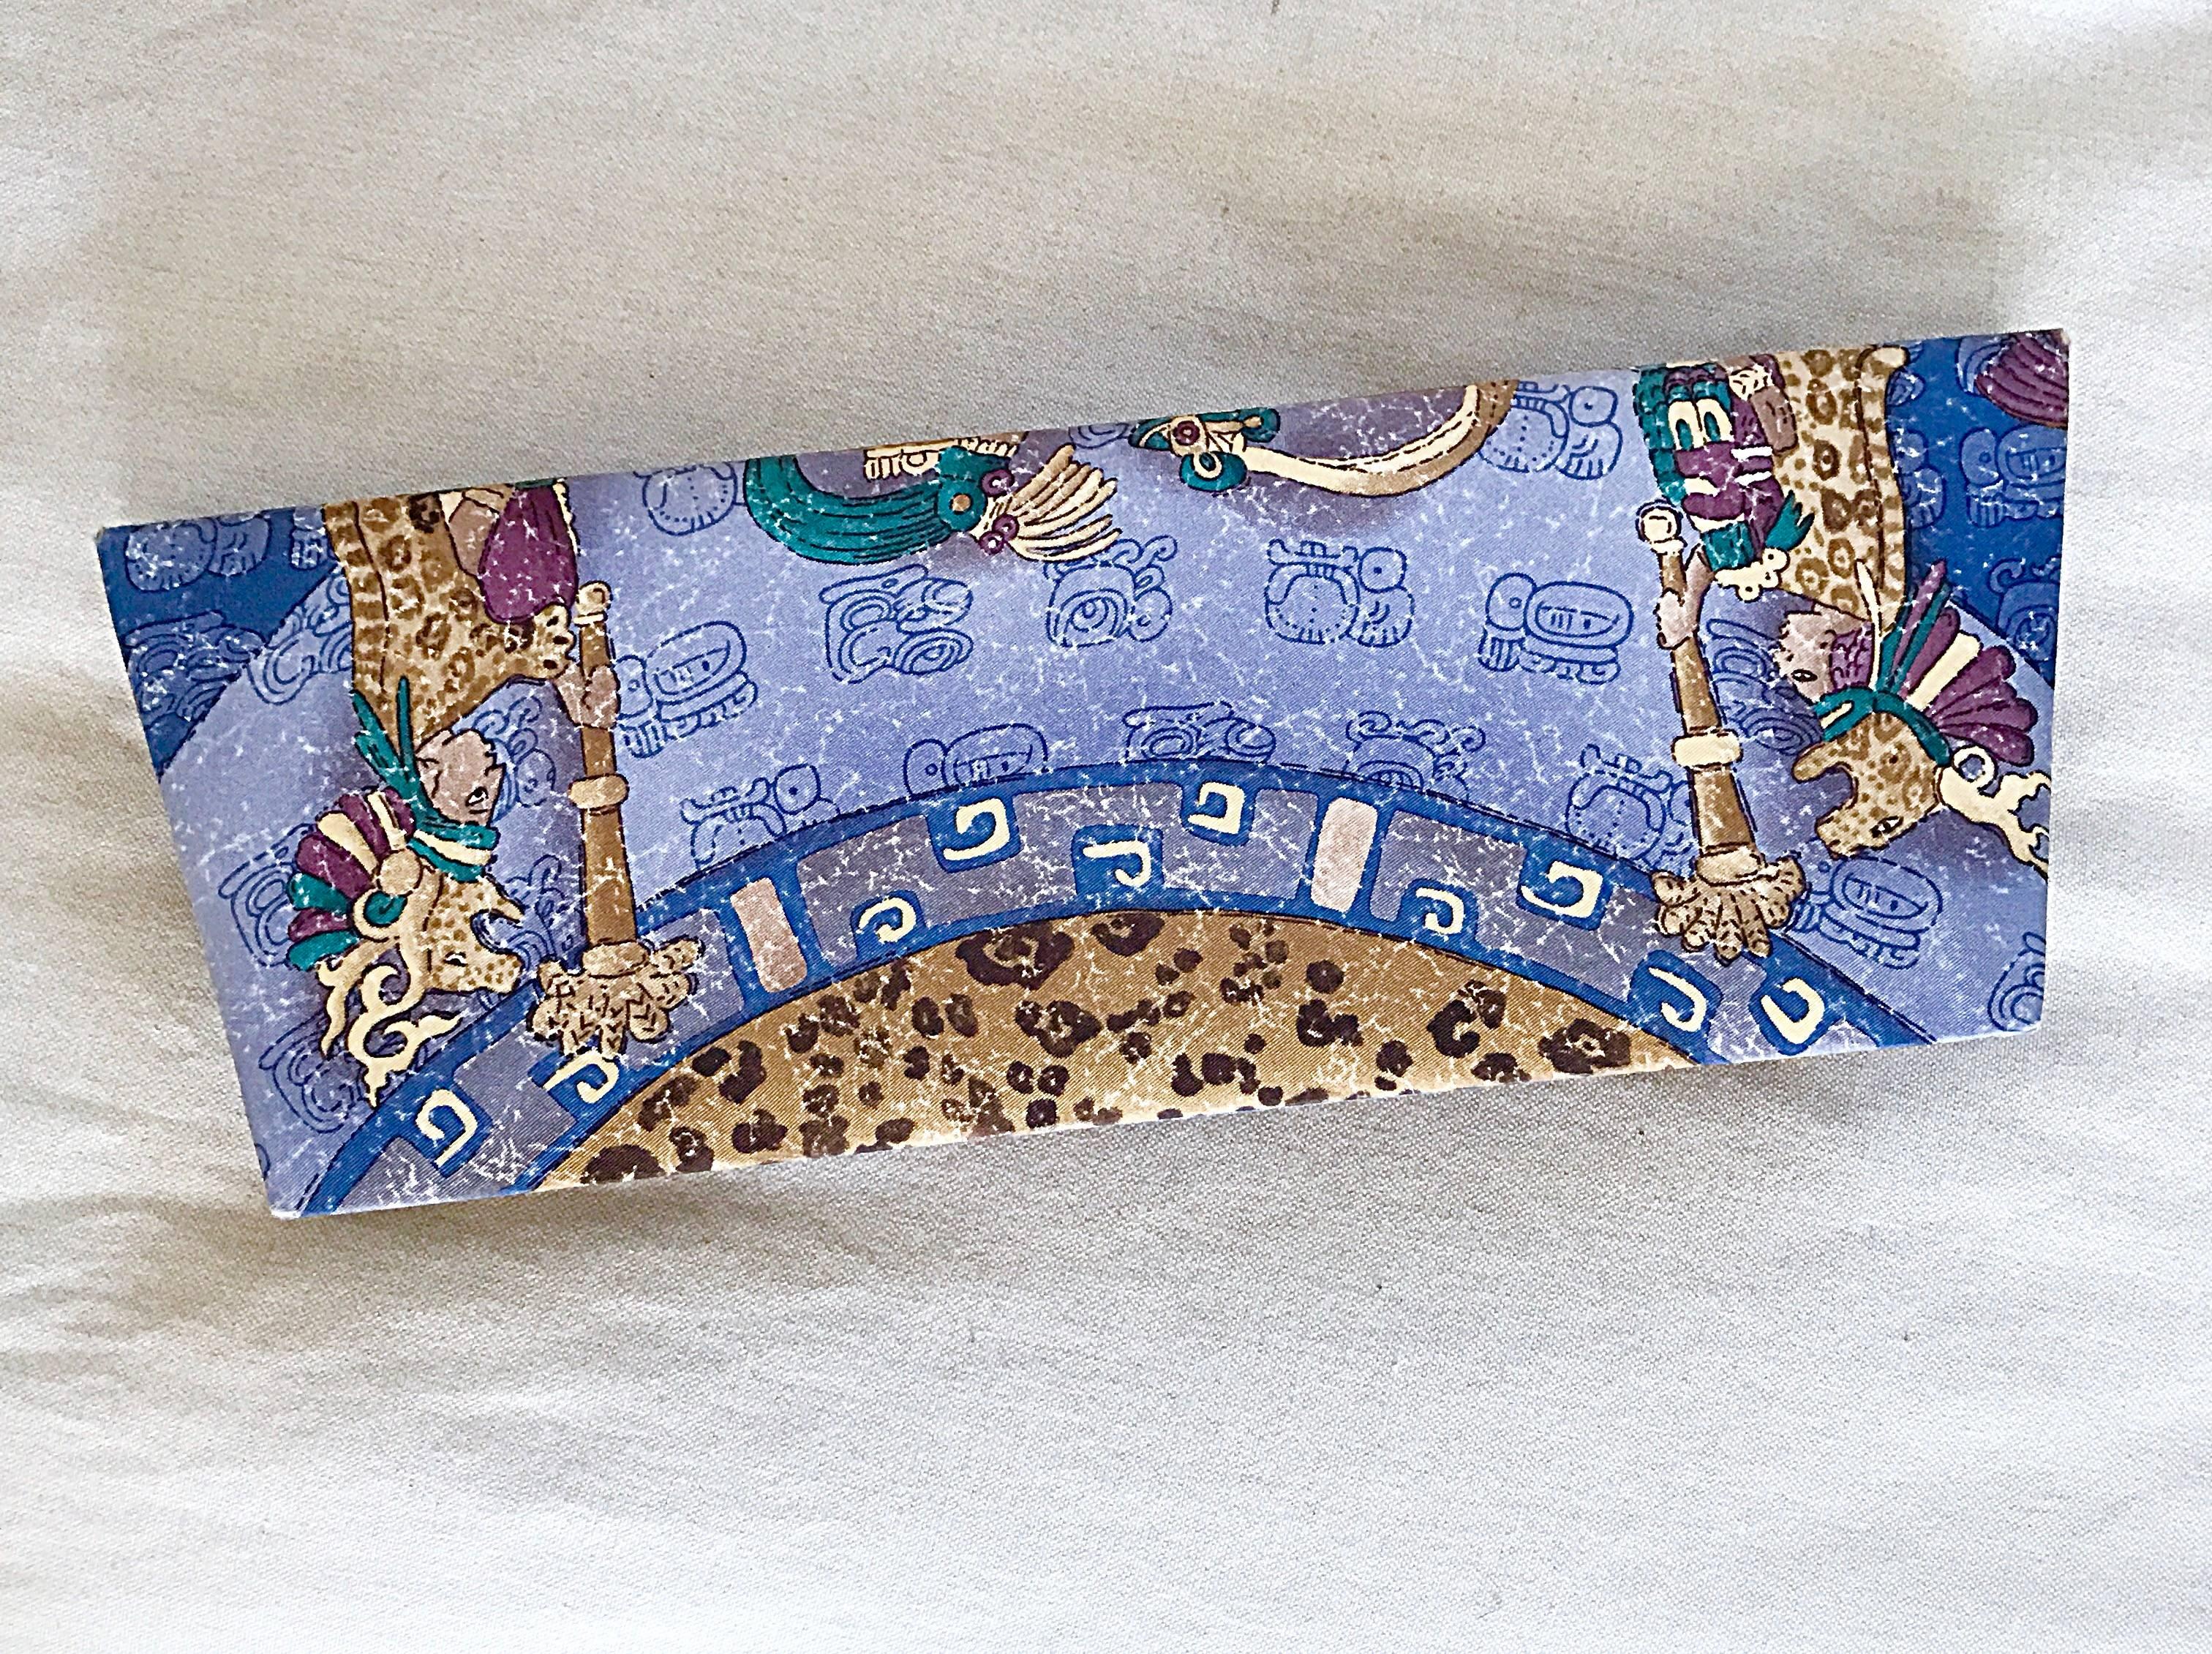 Beautiful vintage PINEDA COVALIN blue silk Aztec / Mexican themed asymmetrical clutch bag! Features Egyptian themed figures, with ornate prints throughout. SLanted shape, with a wider top. Can easily be dressed up or down. Great with jeans or a